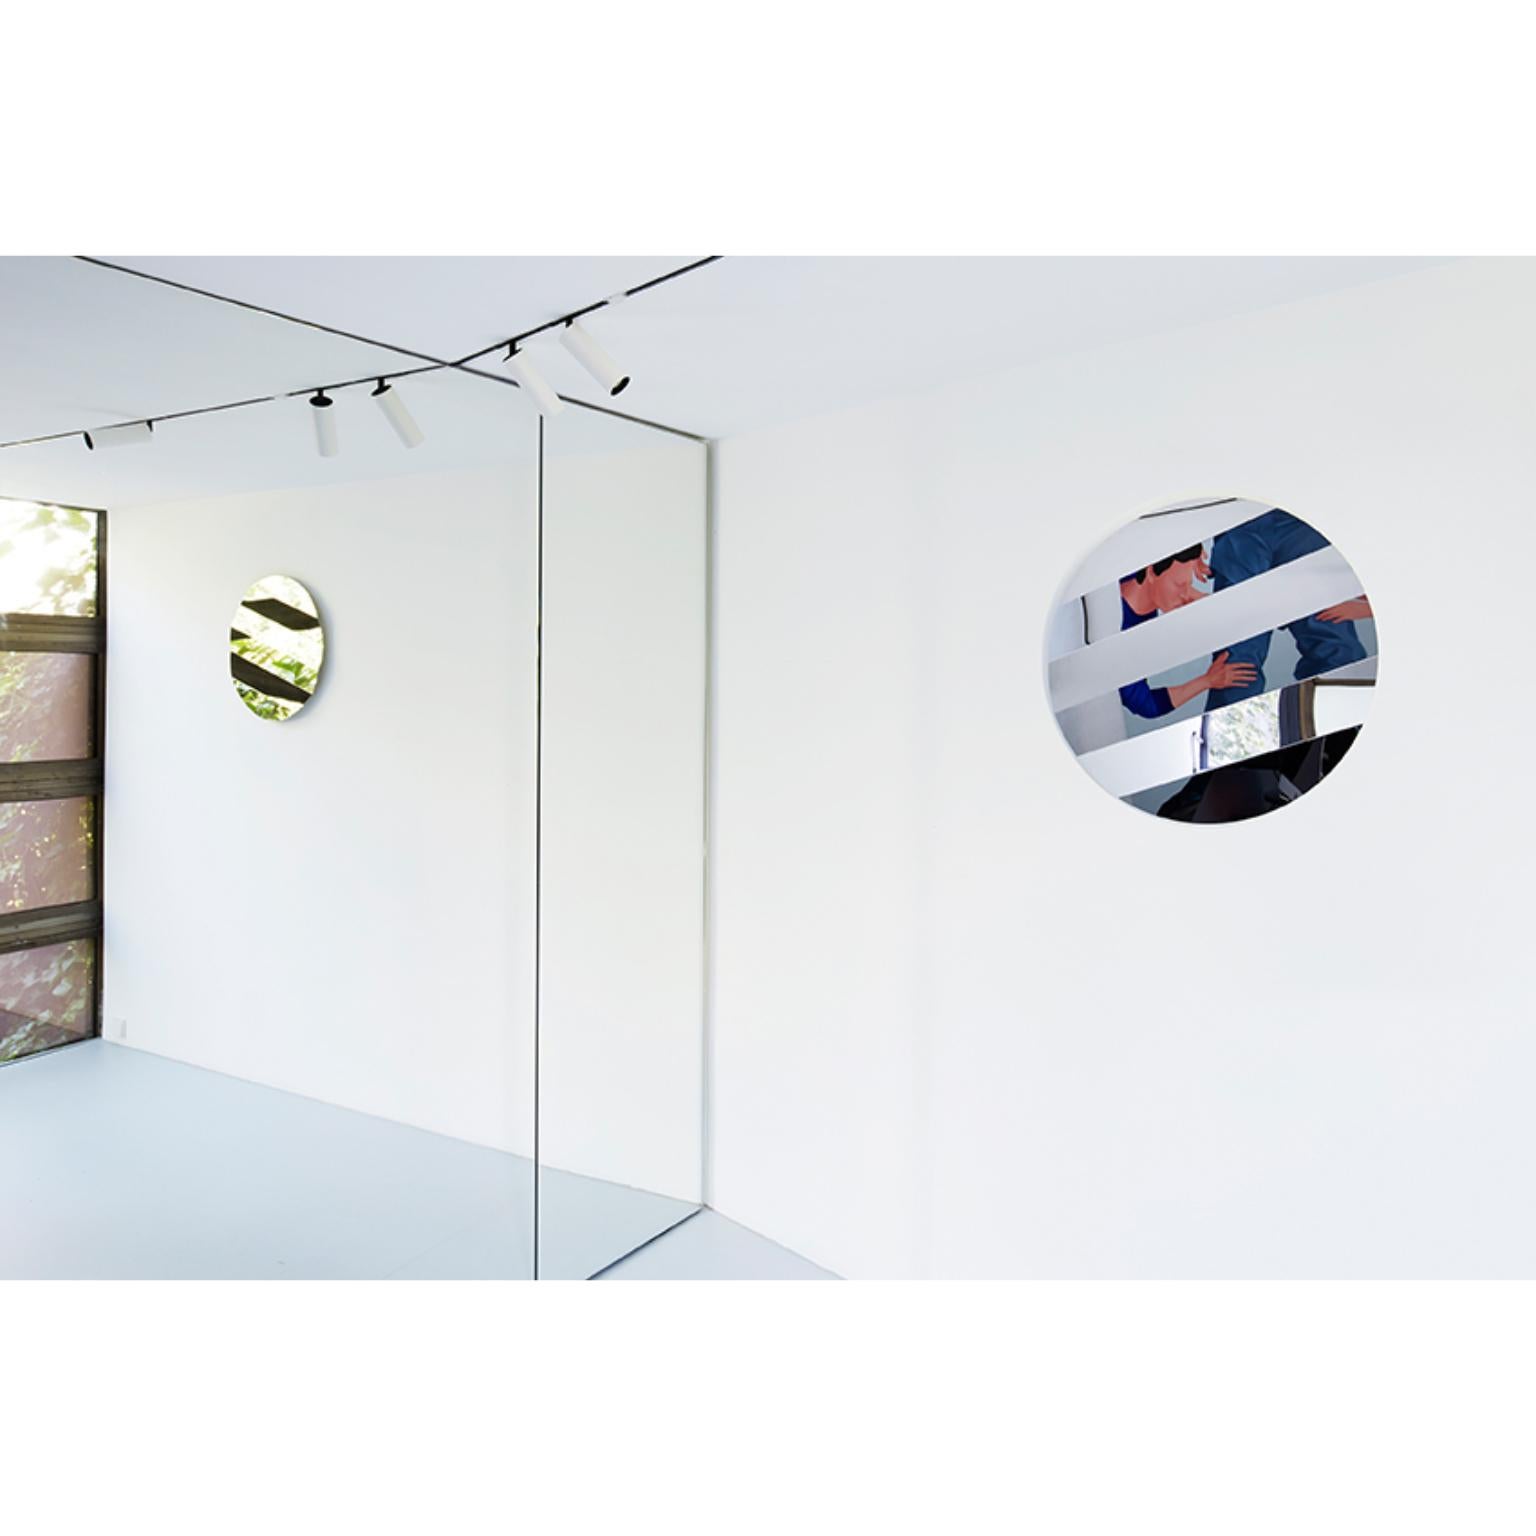 Stripe mirror 90 circle by Sebastian Scherer
Dimensions: ø : 90 
Materials: Mirror Stainless Steel, Wooden Bracket
Different sizes are available. Square version available.

The STRIPE wall mirror creates a fascinating graphic effect: the